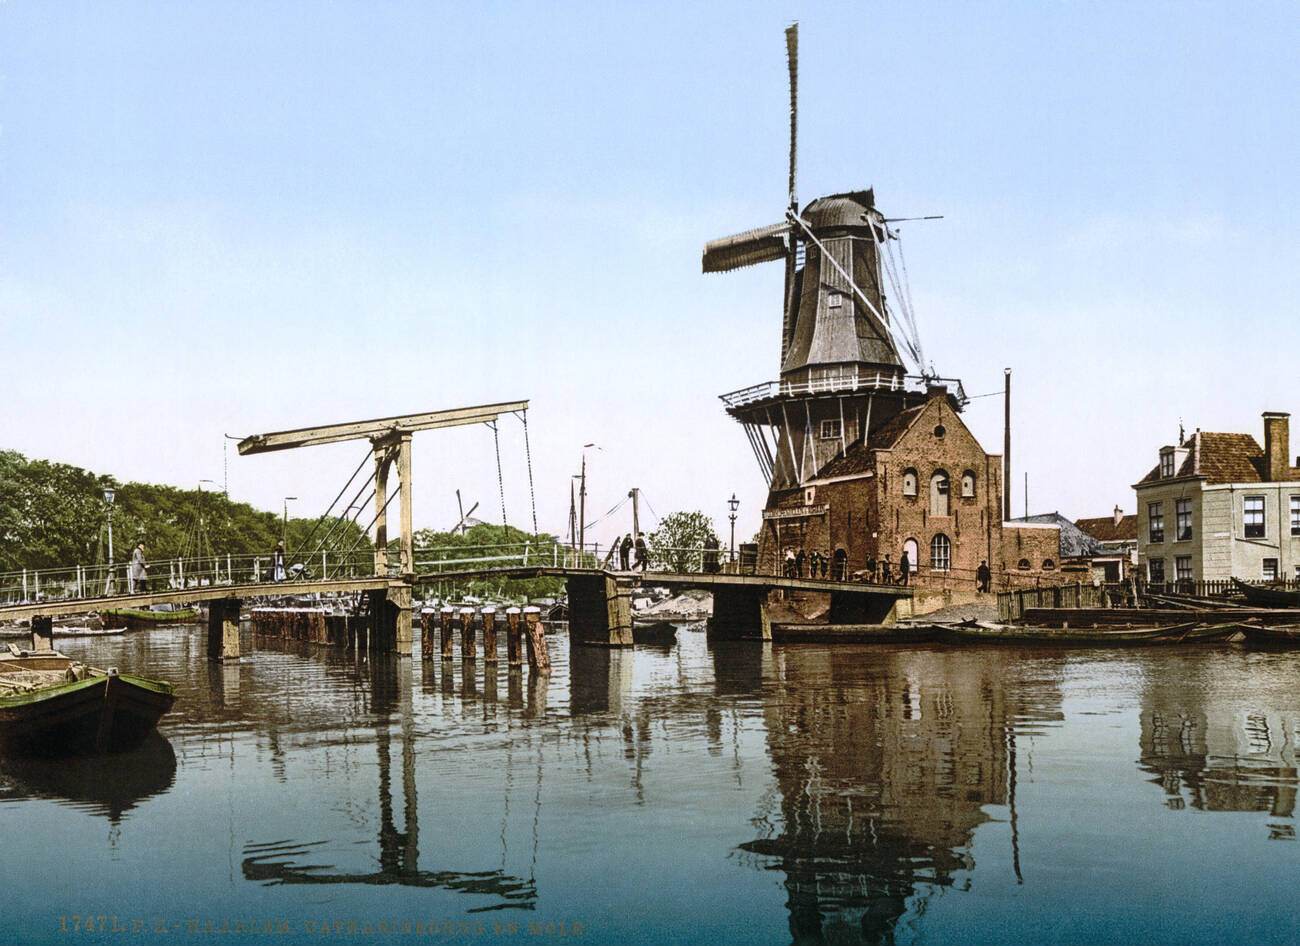 View of Catharine Bridge and windmill in Haarlem, Holland, 1900